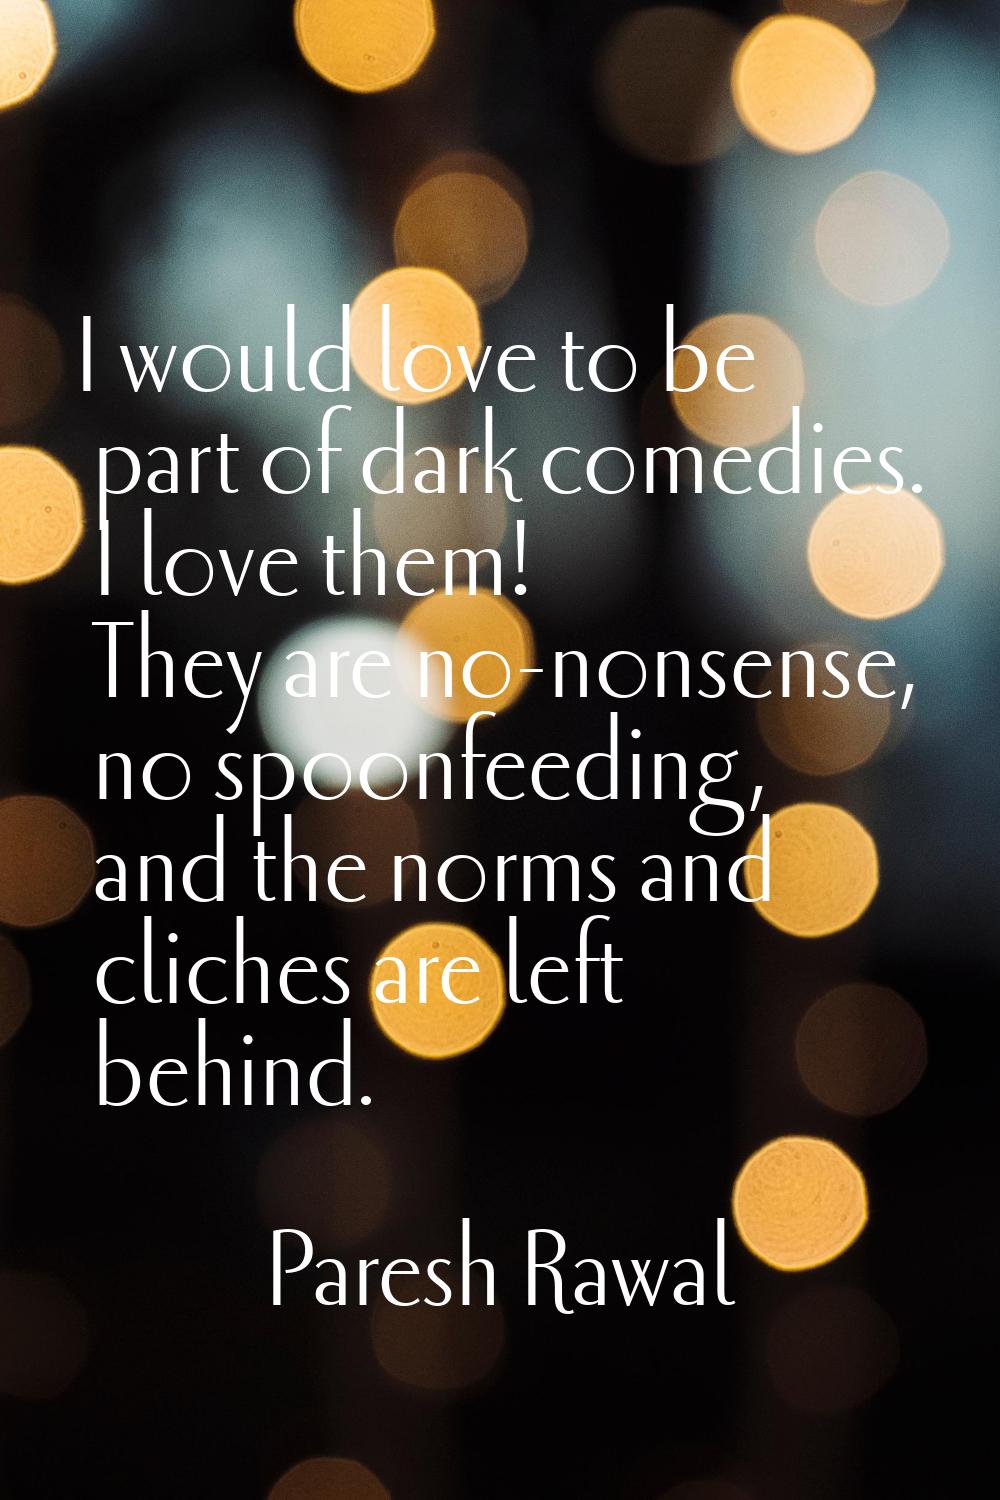 I would love to be part of dark comedies. I love them! They are no-nonsense, no spoonfeeding, and t